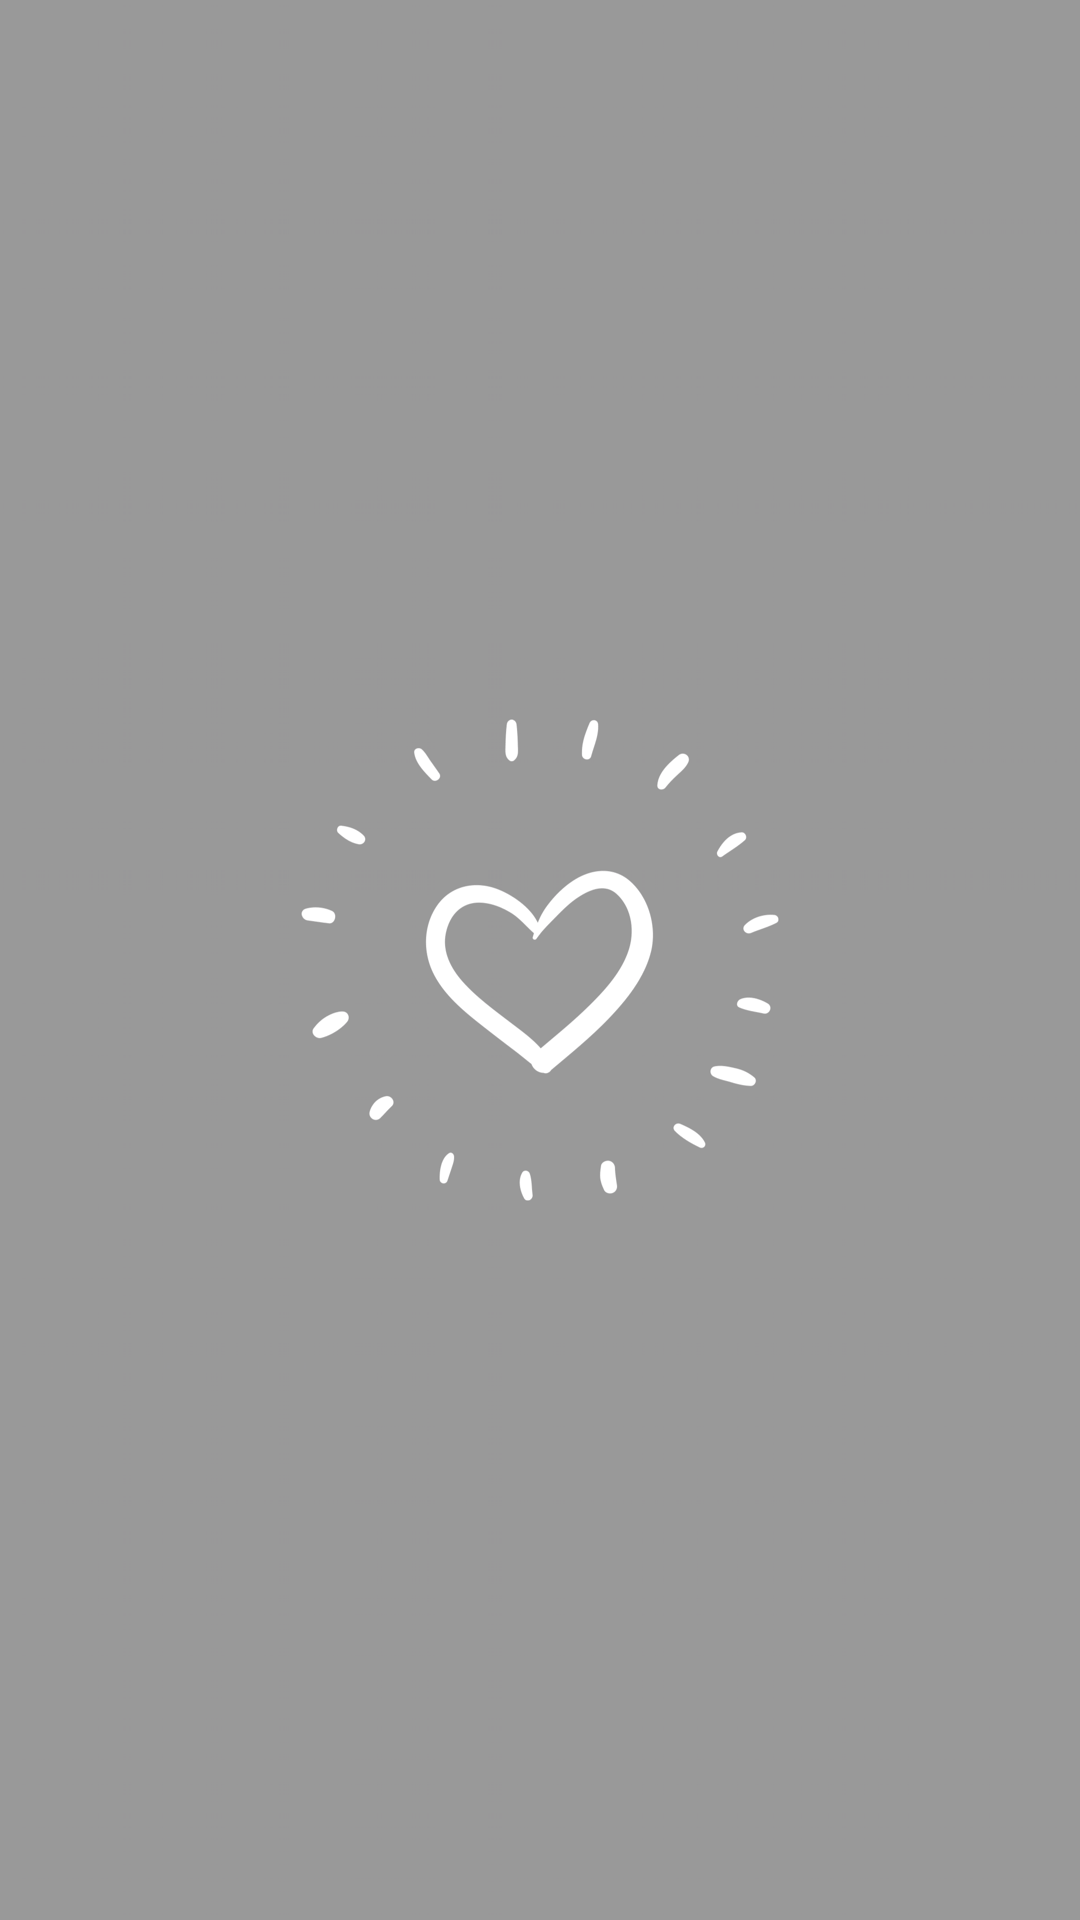 A simple white heart on a grey background - Gray